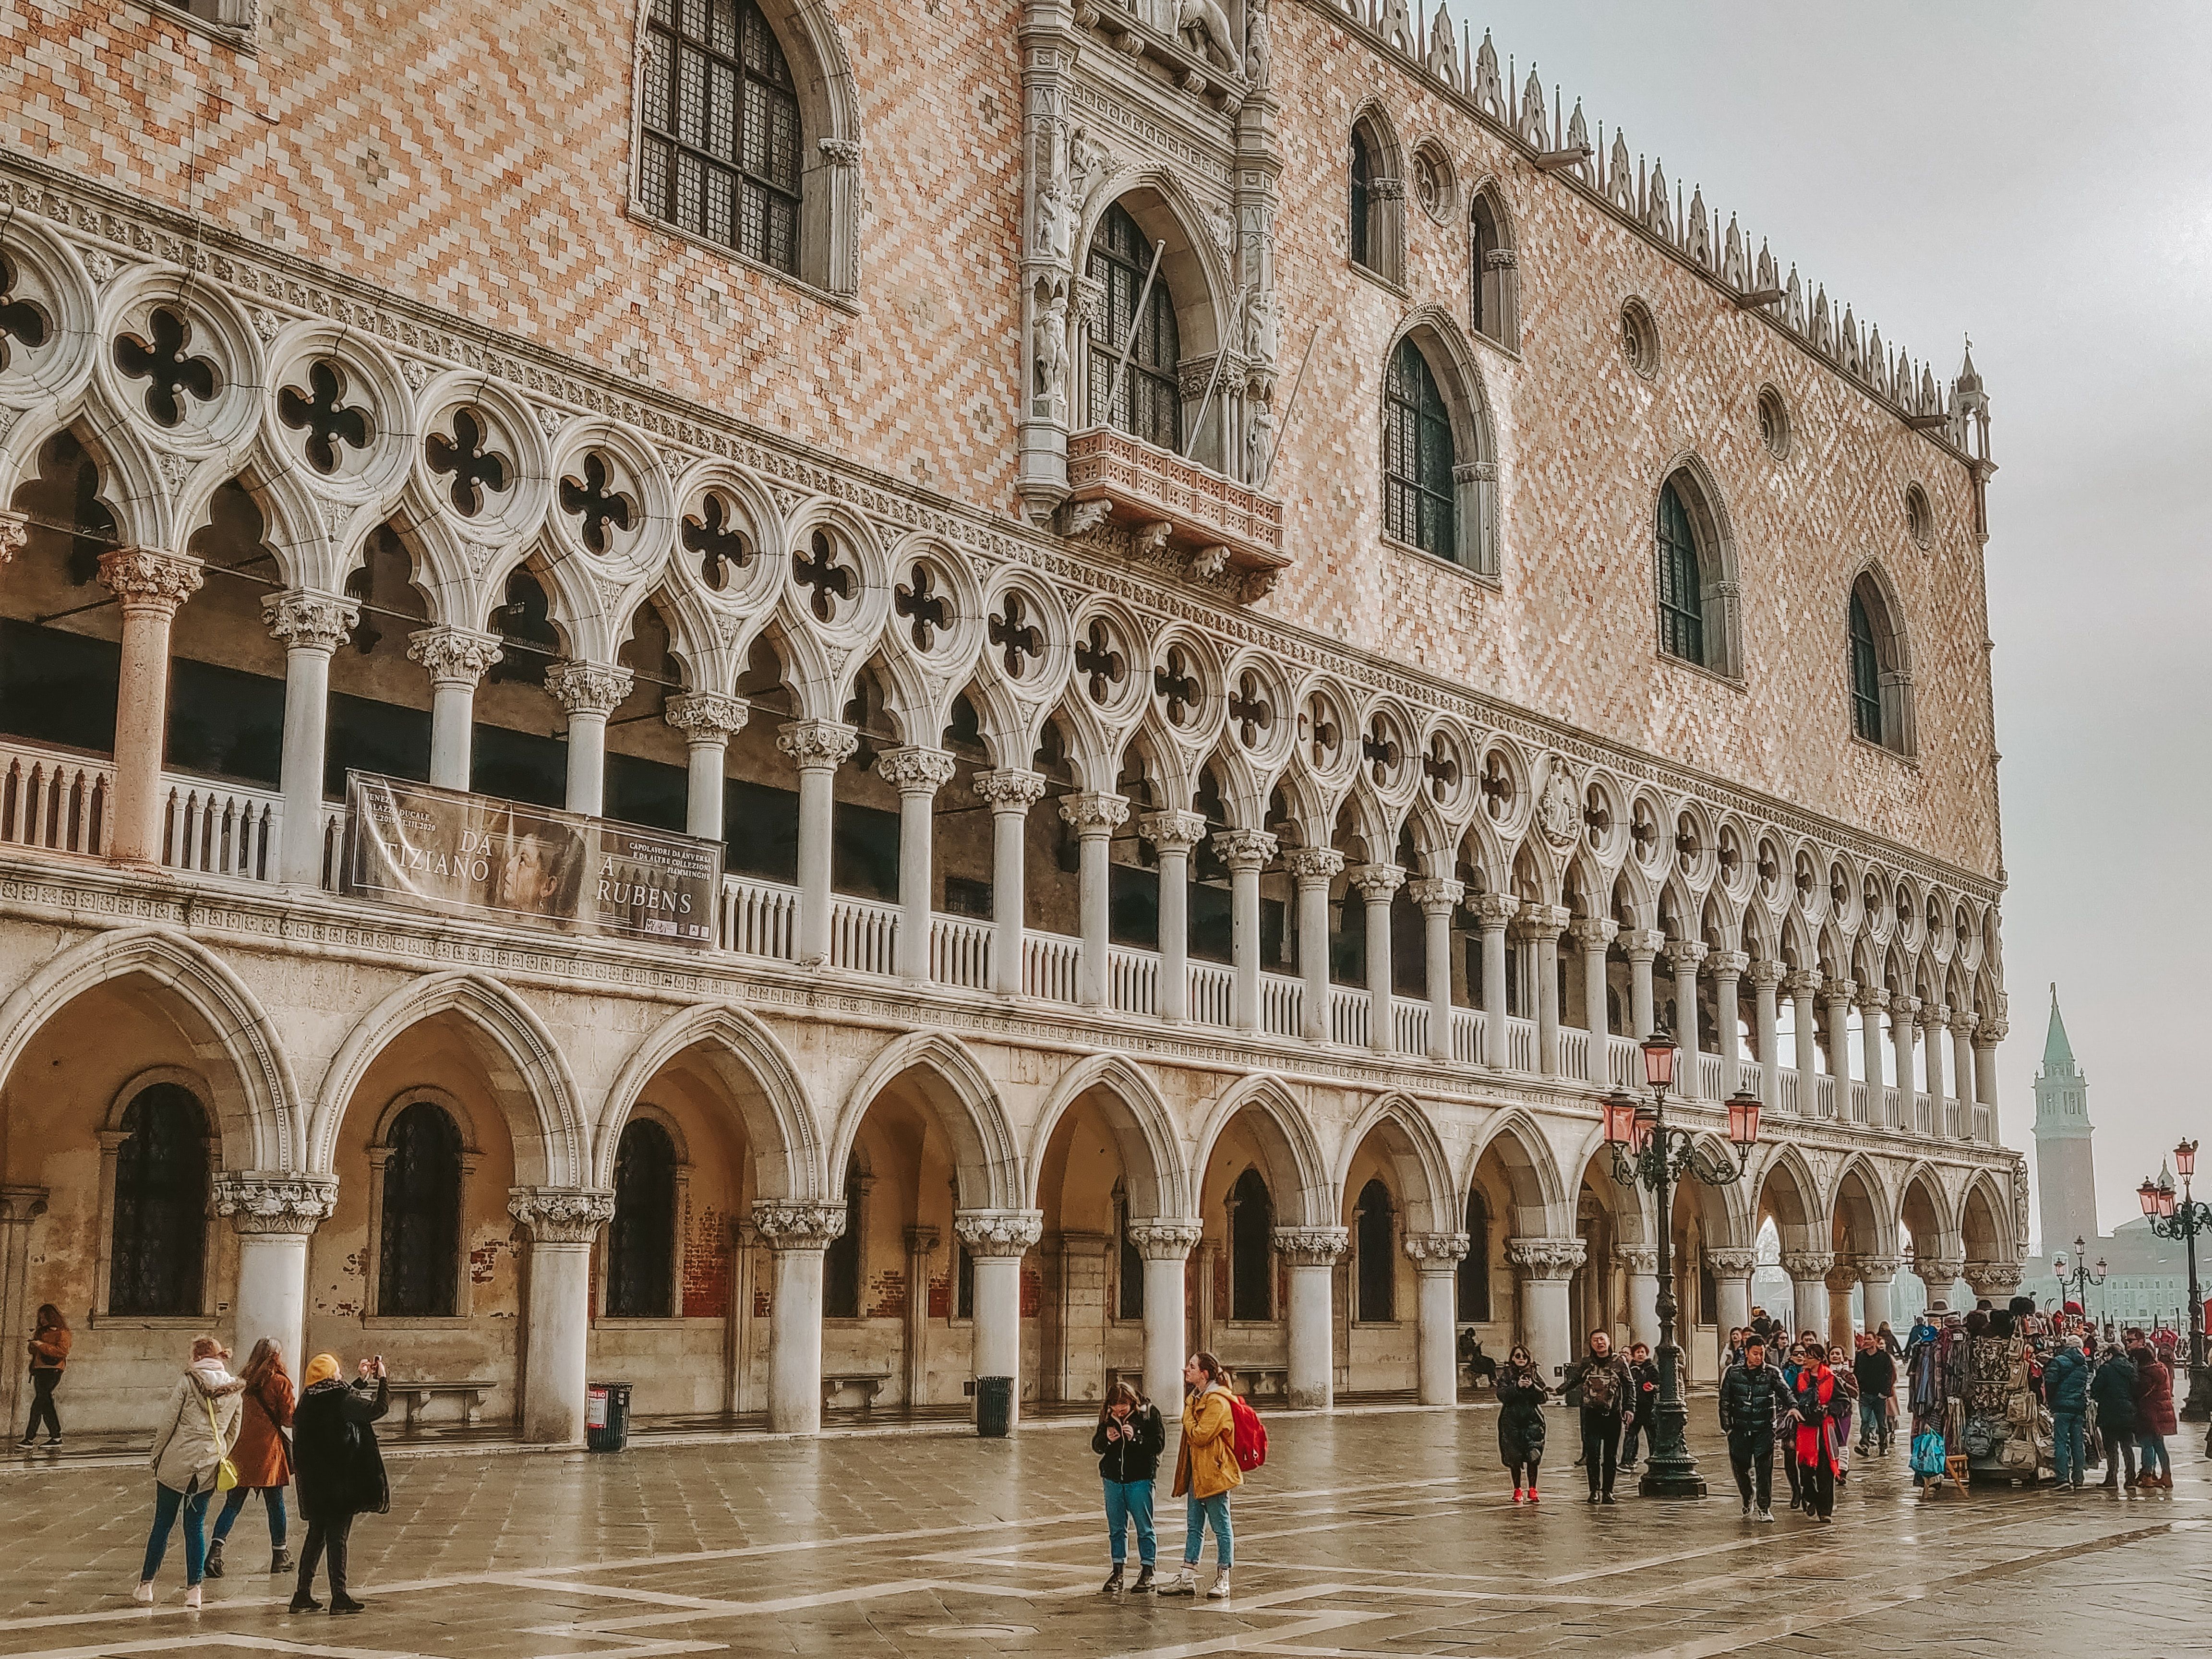 Tourists stroll by the Doge's Palace in Venice